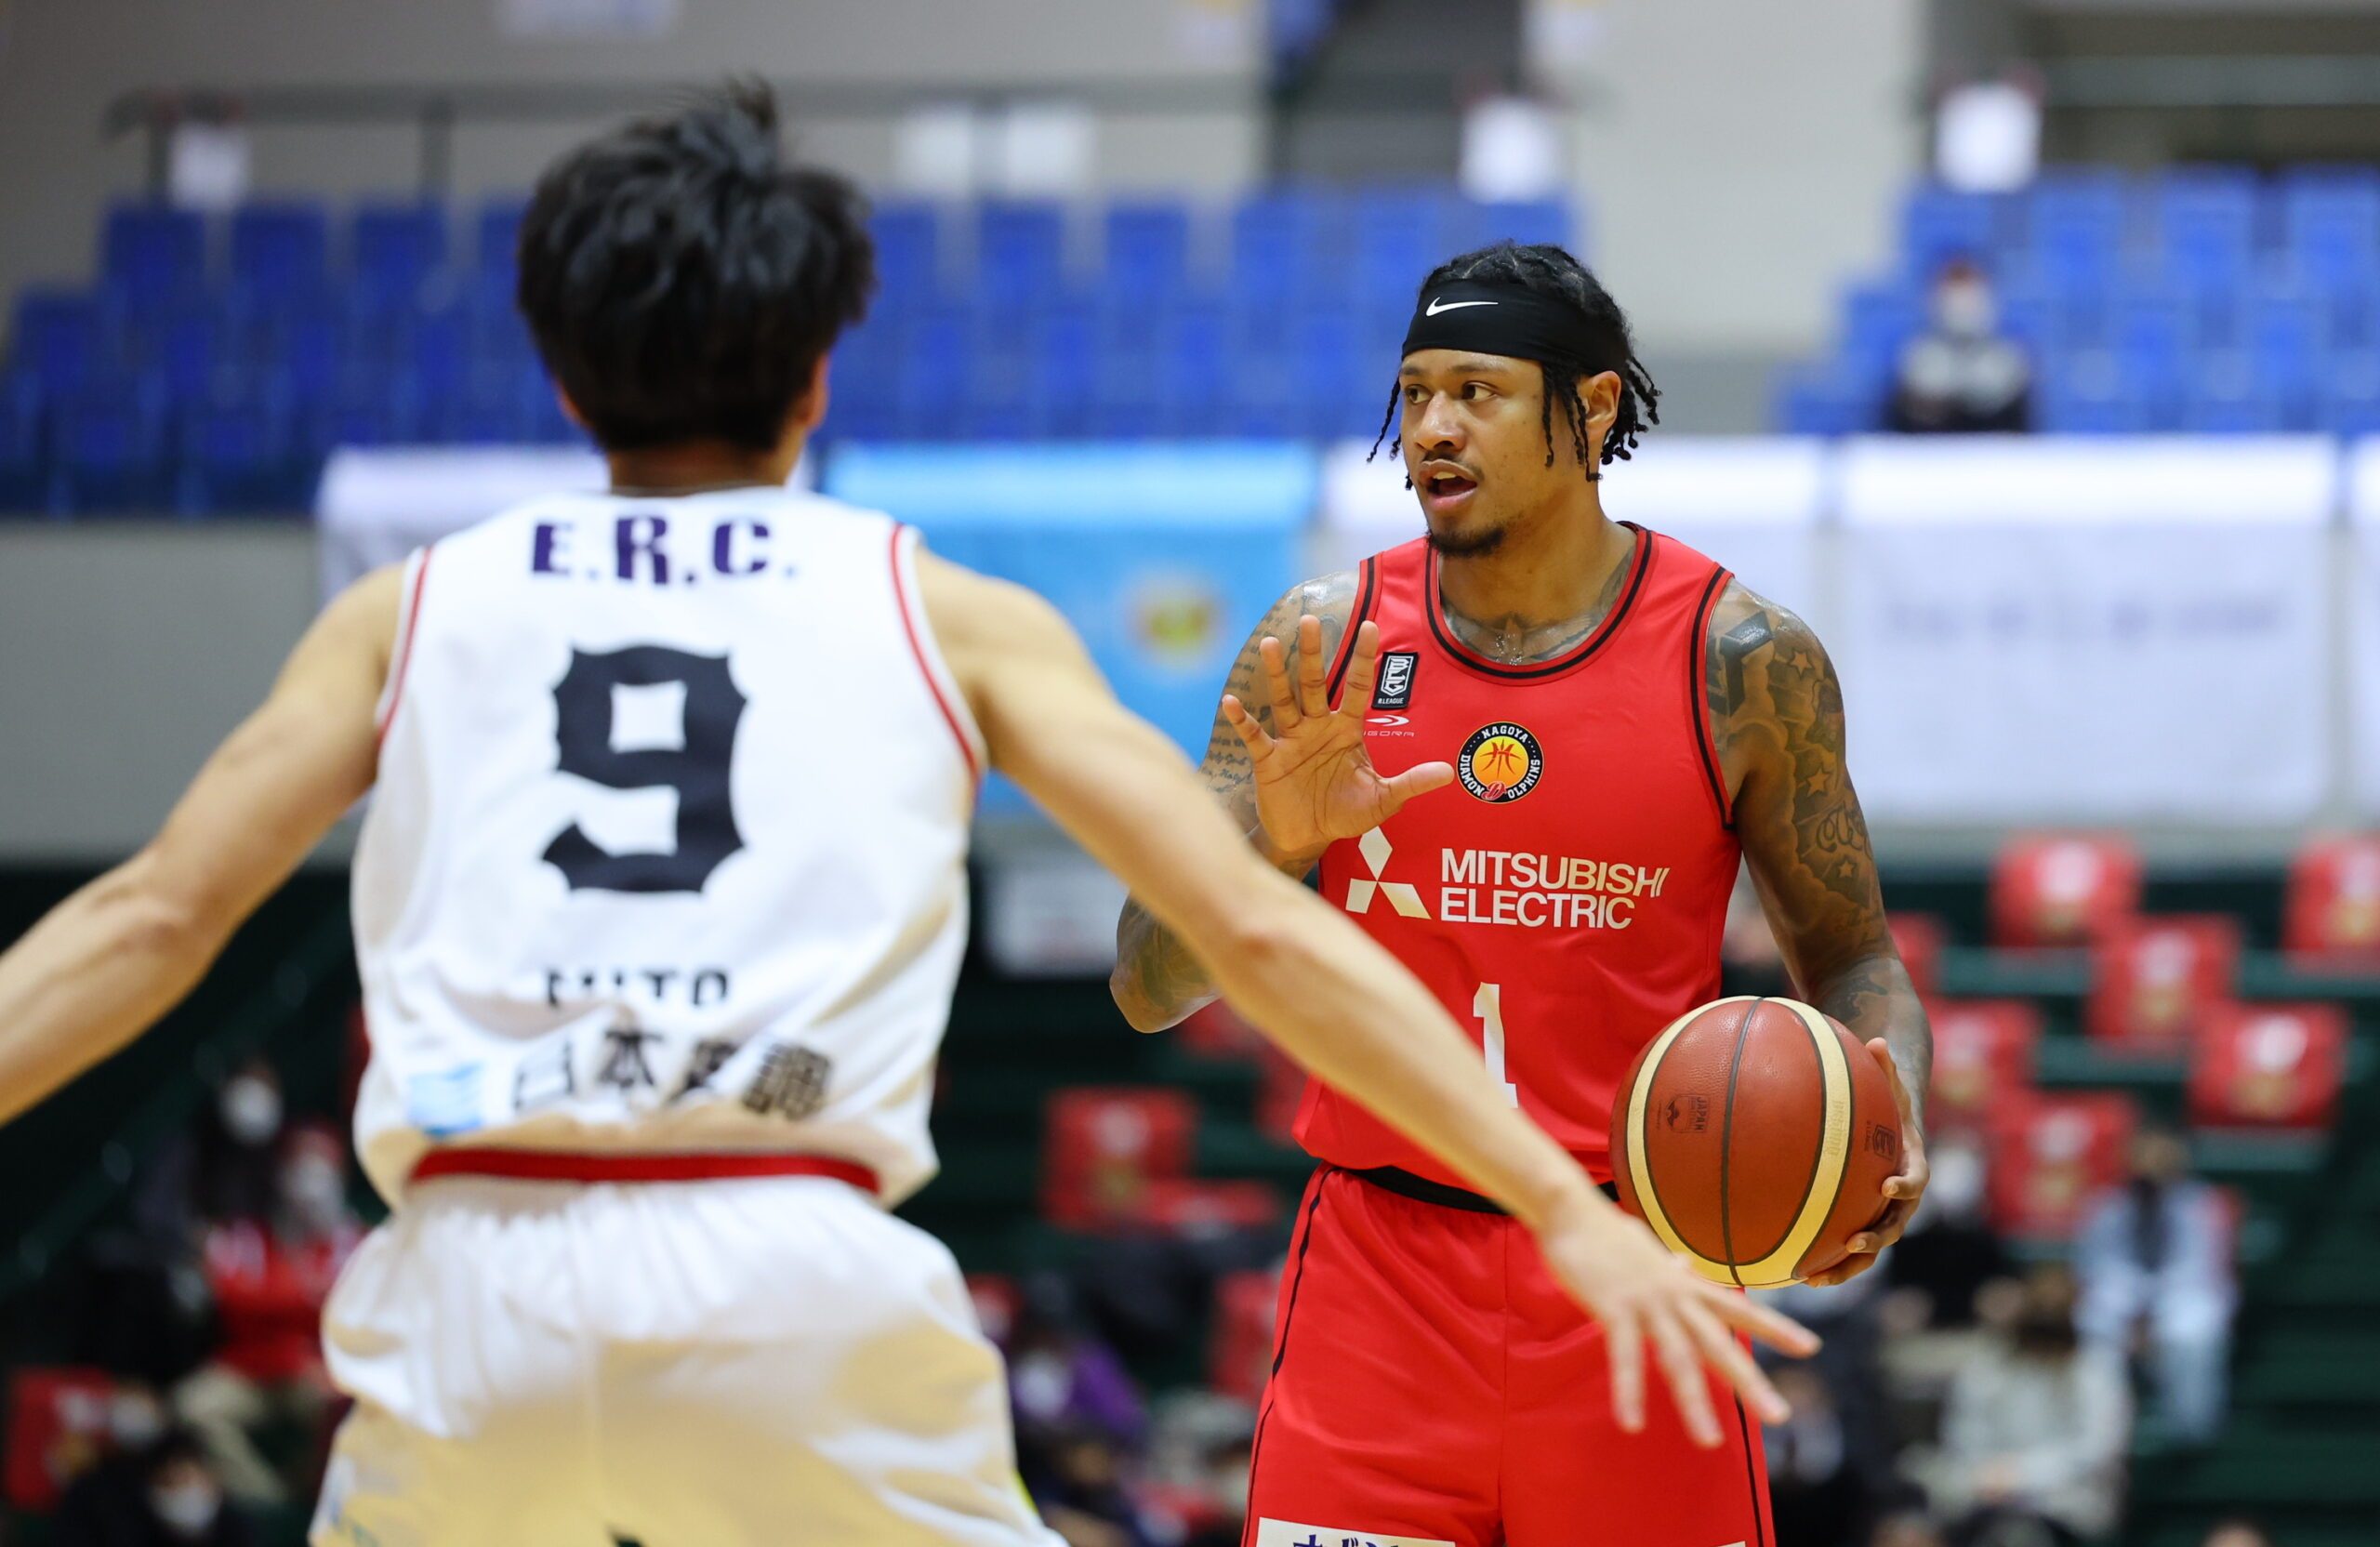 Parks, Nagoya crush Kyoto for 6th straight win; Thirdy, San-En slump to 14-game skid